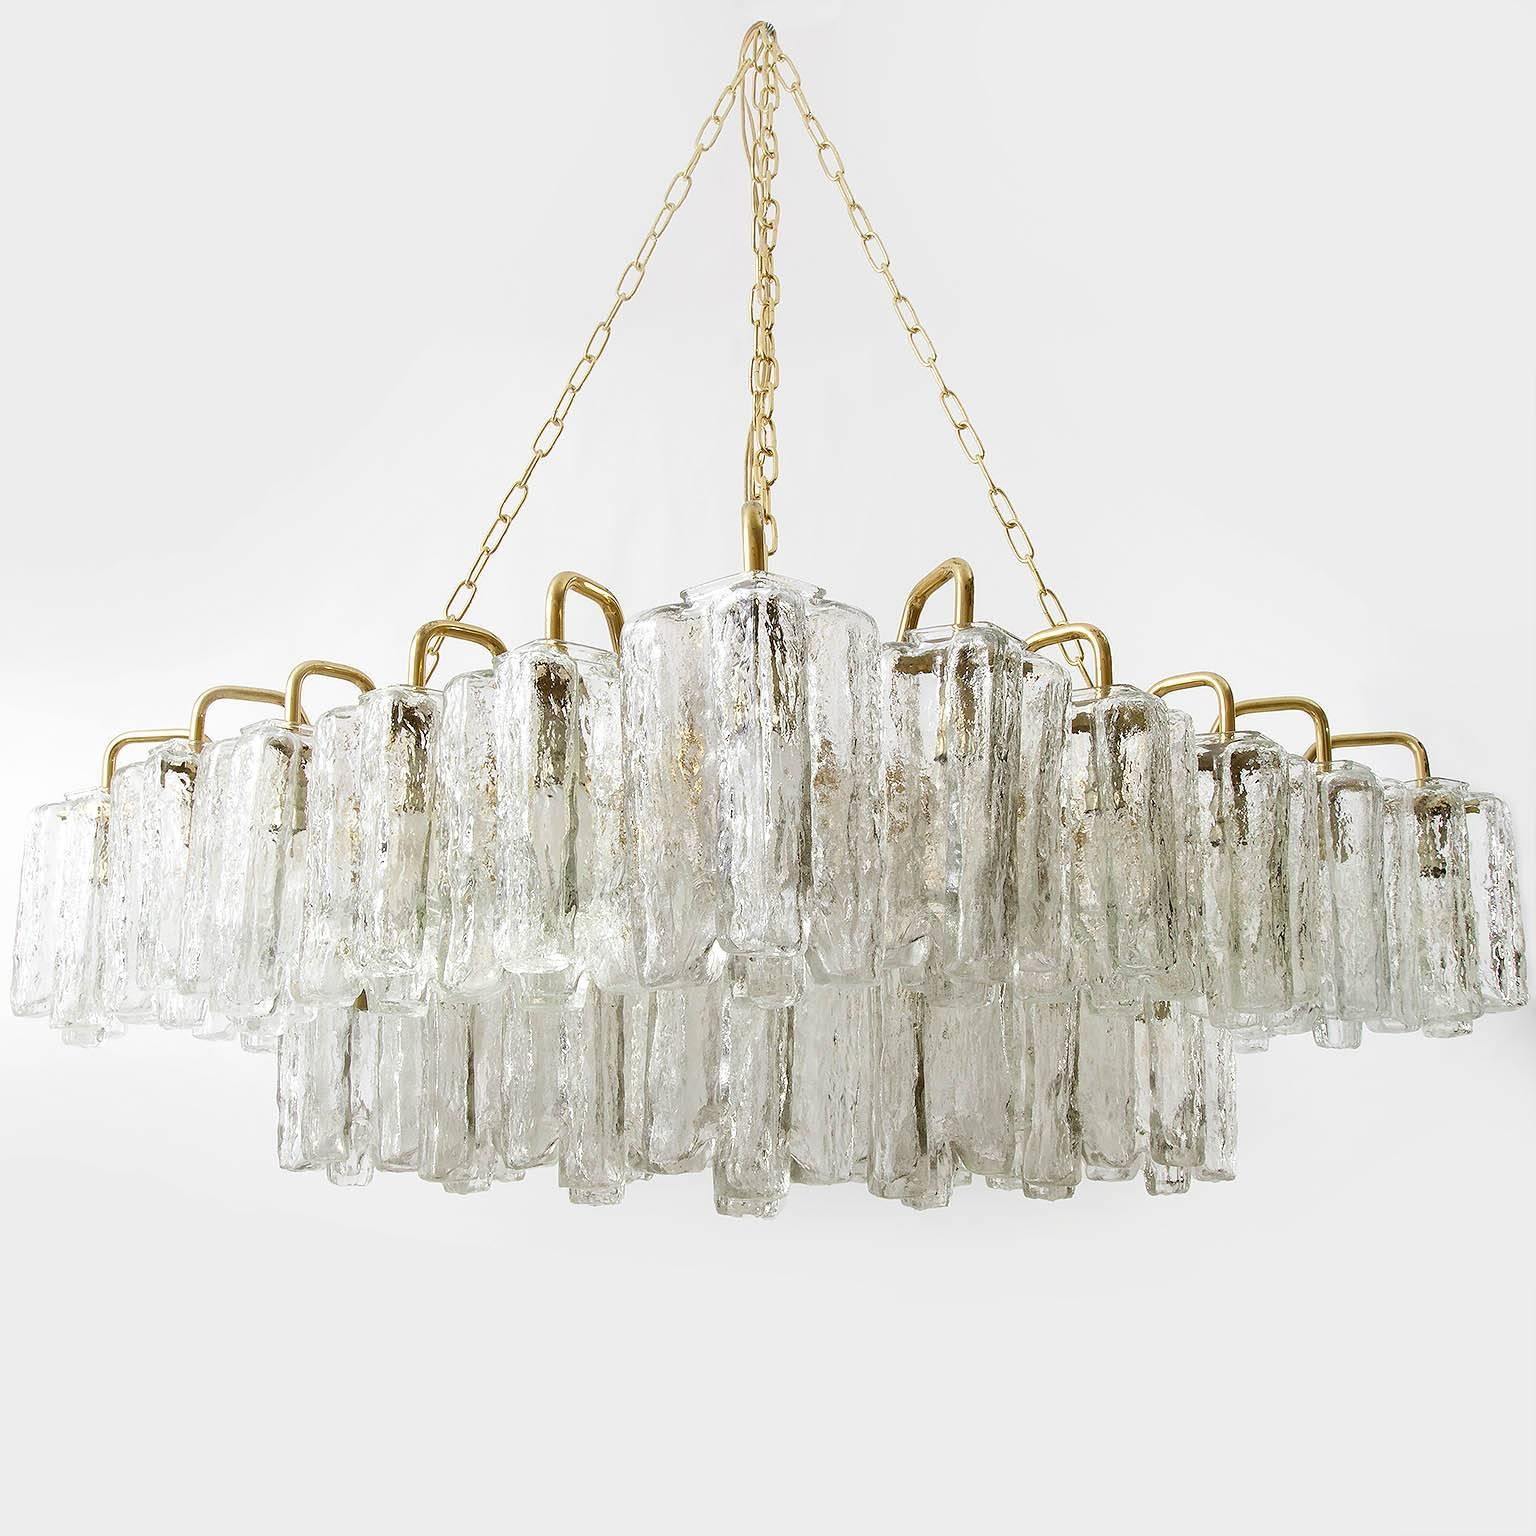 Two (a pair of) square and large light fixtures by J.T. Kalmar, Austria, manufactured in Mid-Century, ca. 1970 (end of 1960s and beginning of 1970s). 
They can be used as pendant lights / chandeliers or as flush mount lights because they can be hung